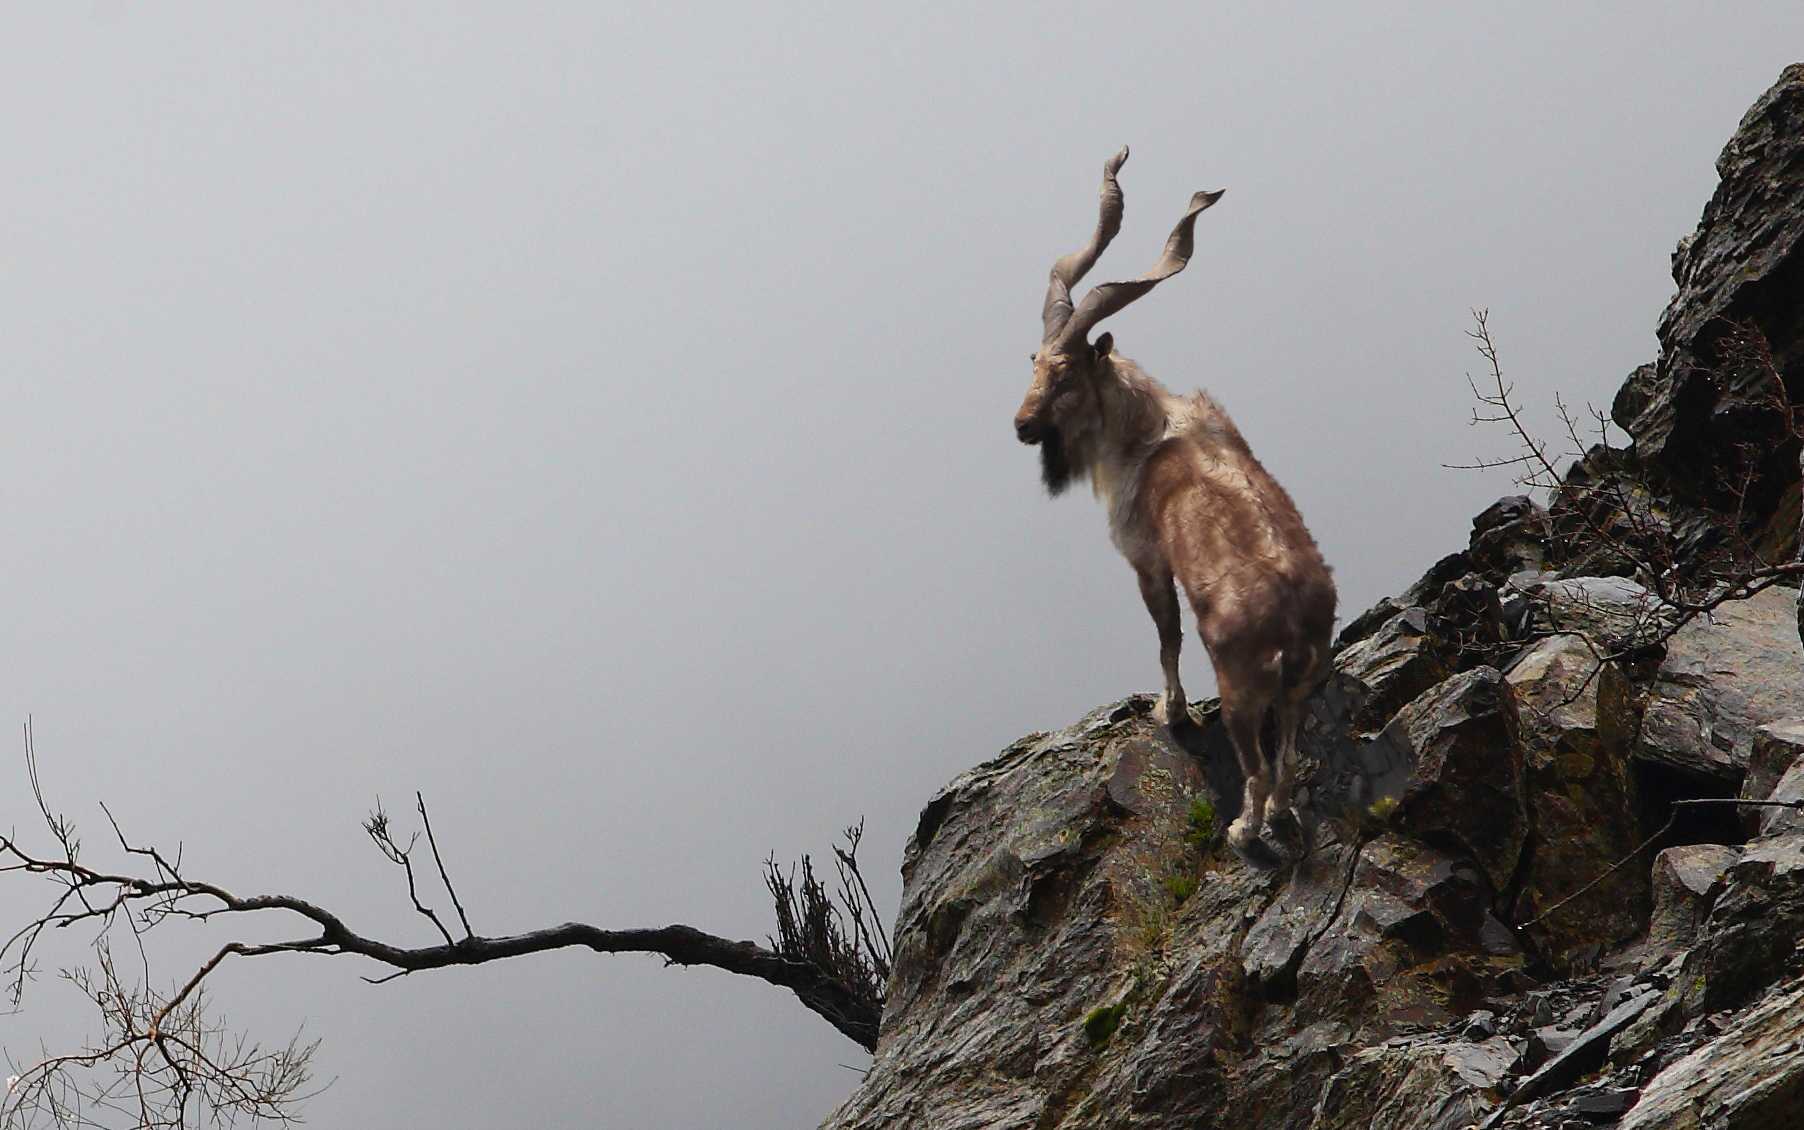 Another American hunts Markhor in Pakistan, paying Rs20 million for permit